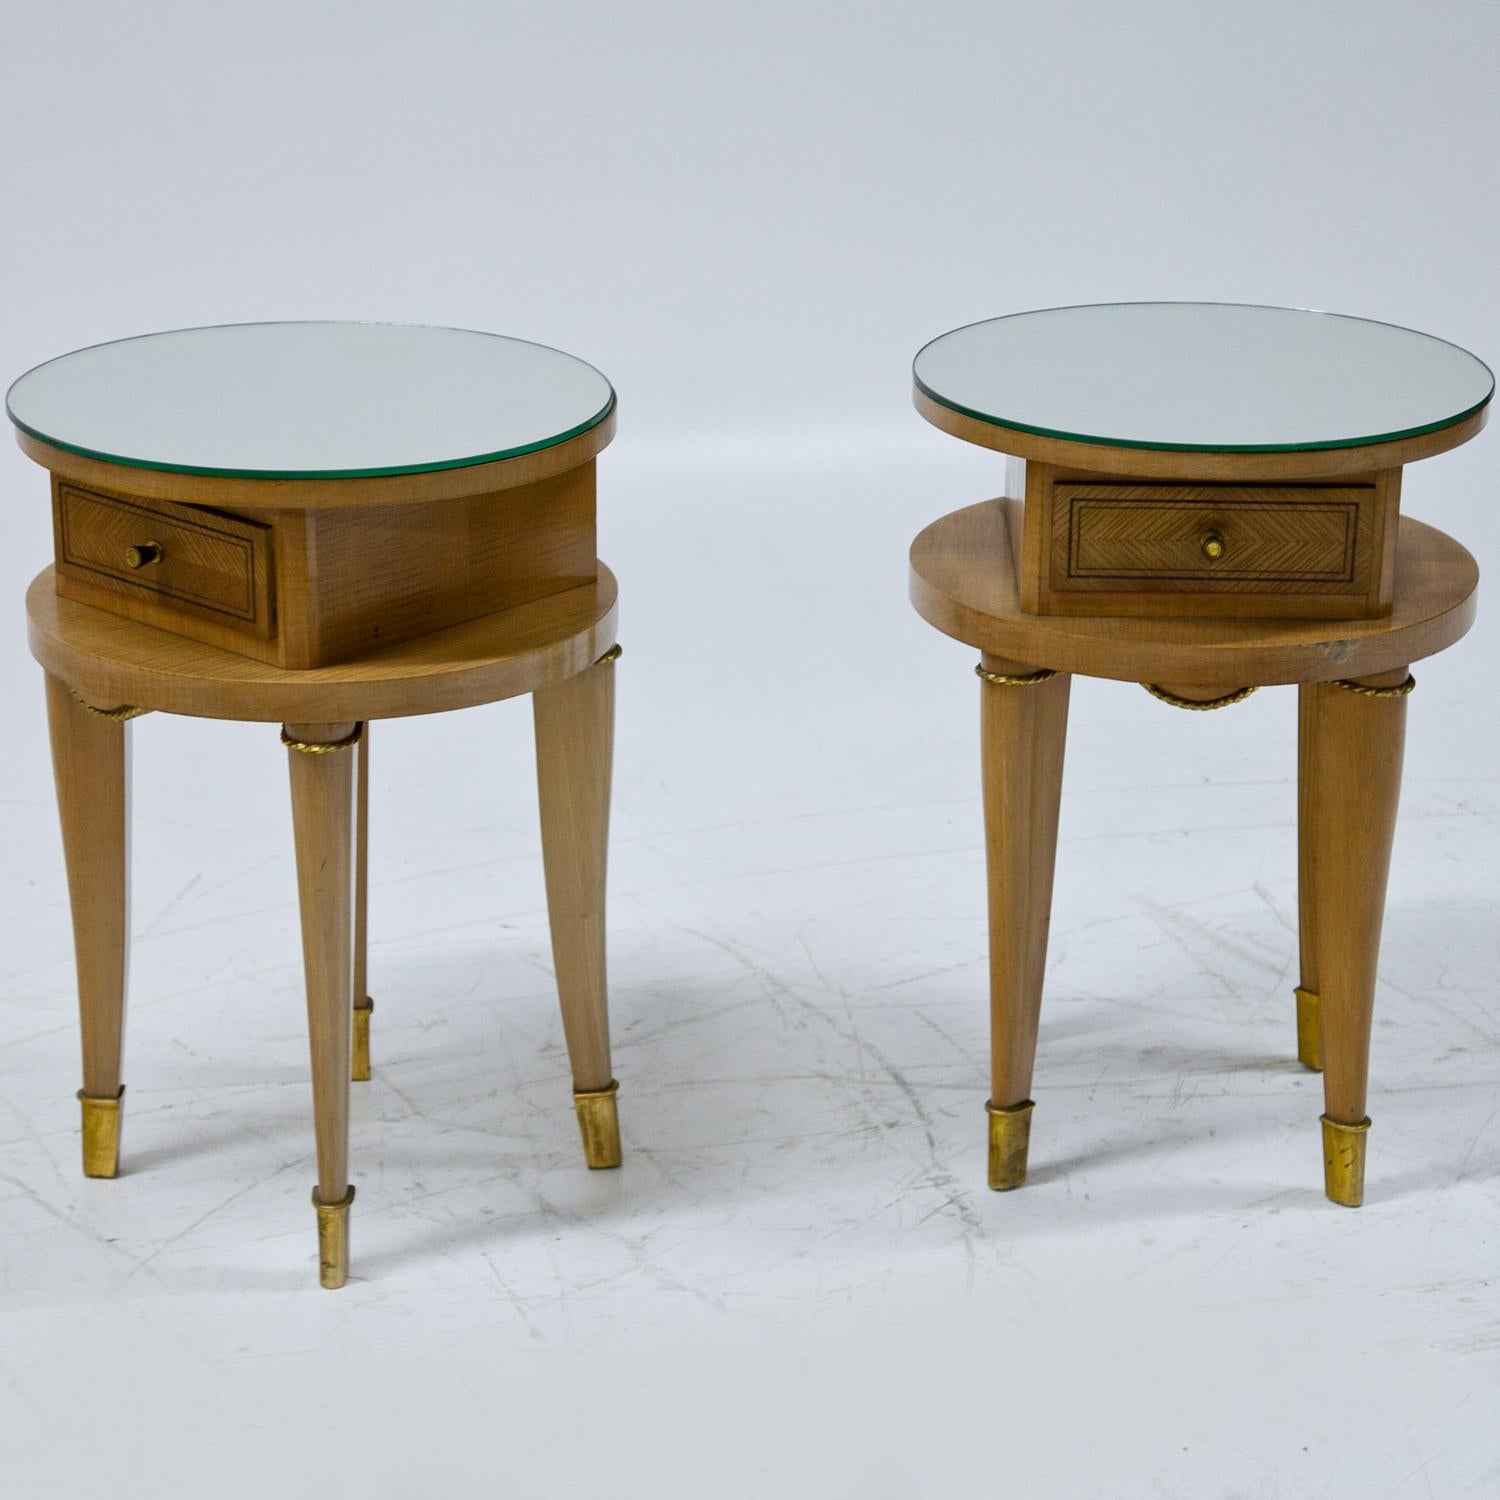 Early 20th Century Art Deco Side Tables, 1920s